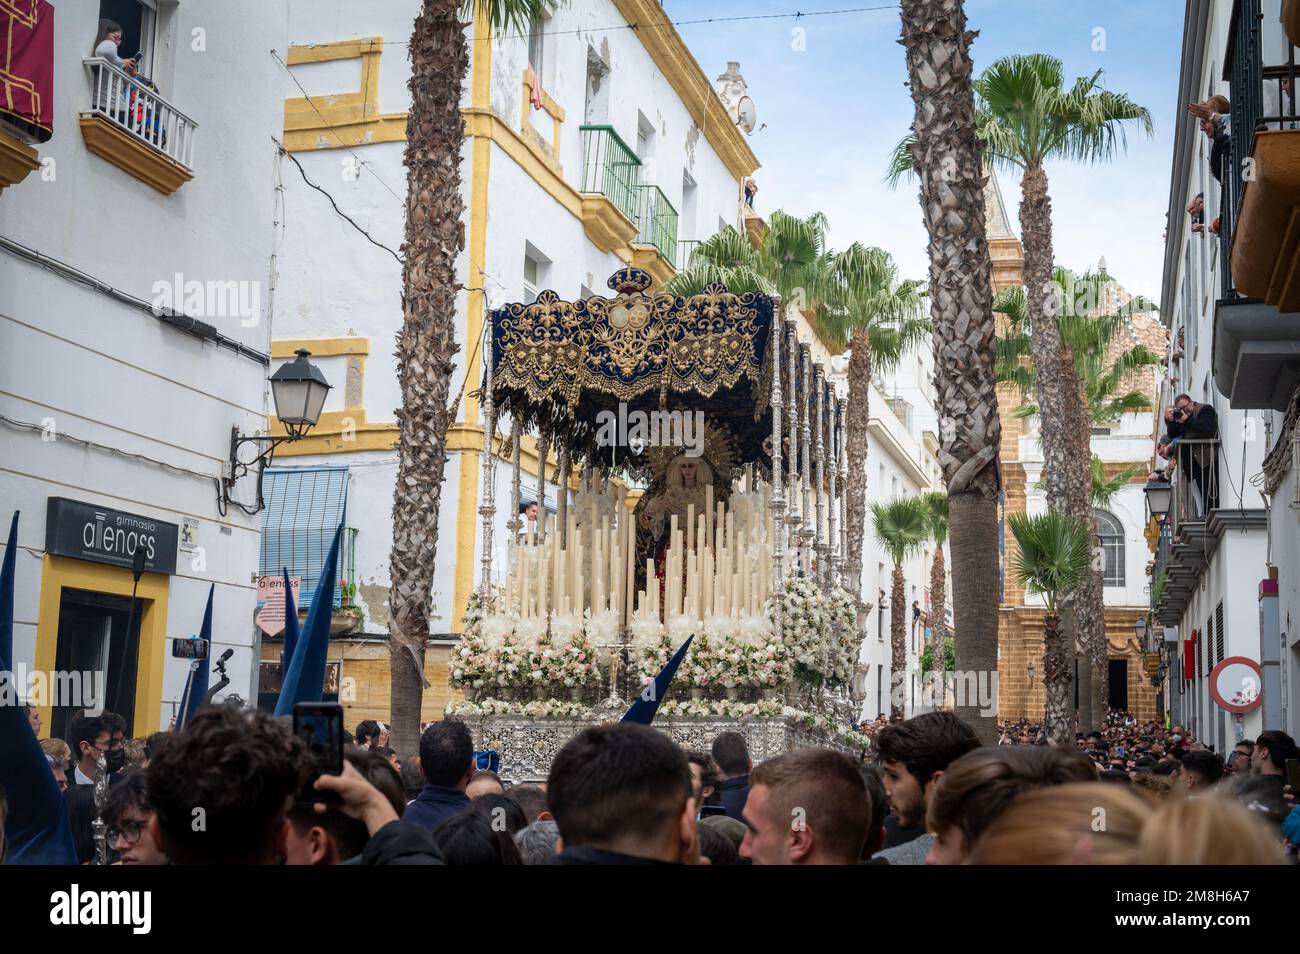 Detail of a throne carrying an effigy of Madonna in an Easter Parade during Holy Week or Semana Santa in Cadiz, Spain Stock Photo